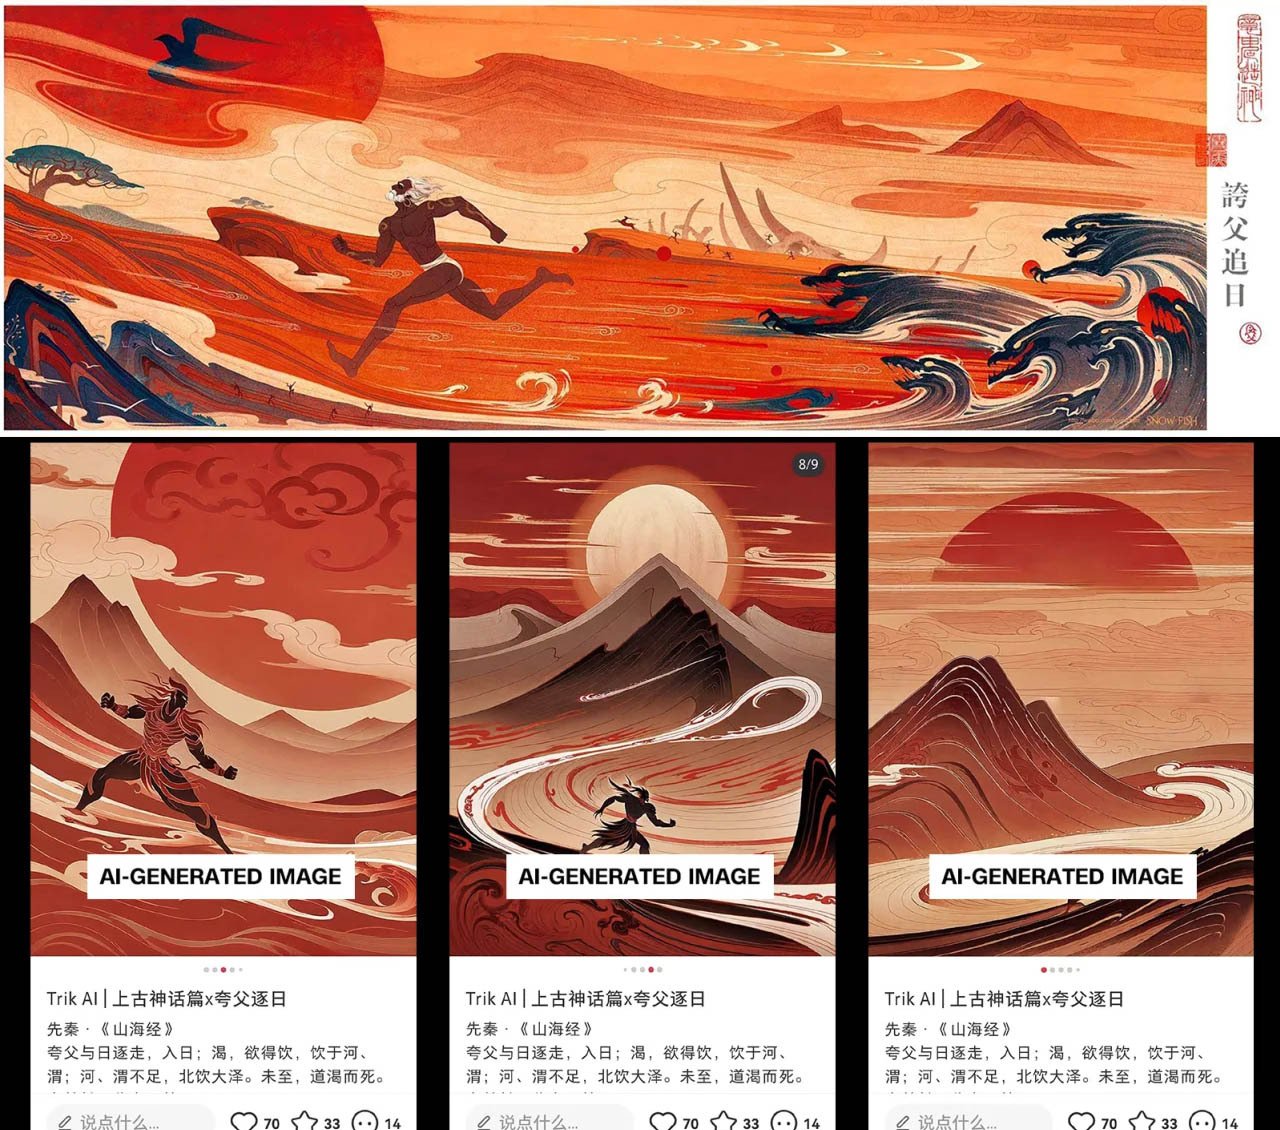 A comparison of original digital artwork by the Chinese artist Snow Fish (above) and AI-generated artworks posted to Xiaohongshu that appear to be based on Snow Fish's artwork (bottom).